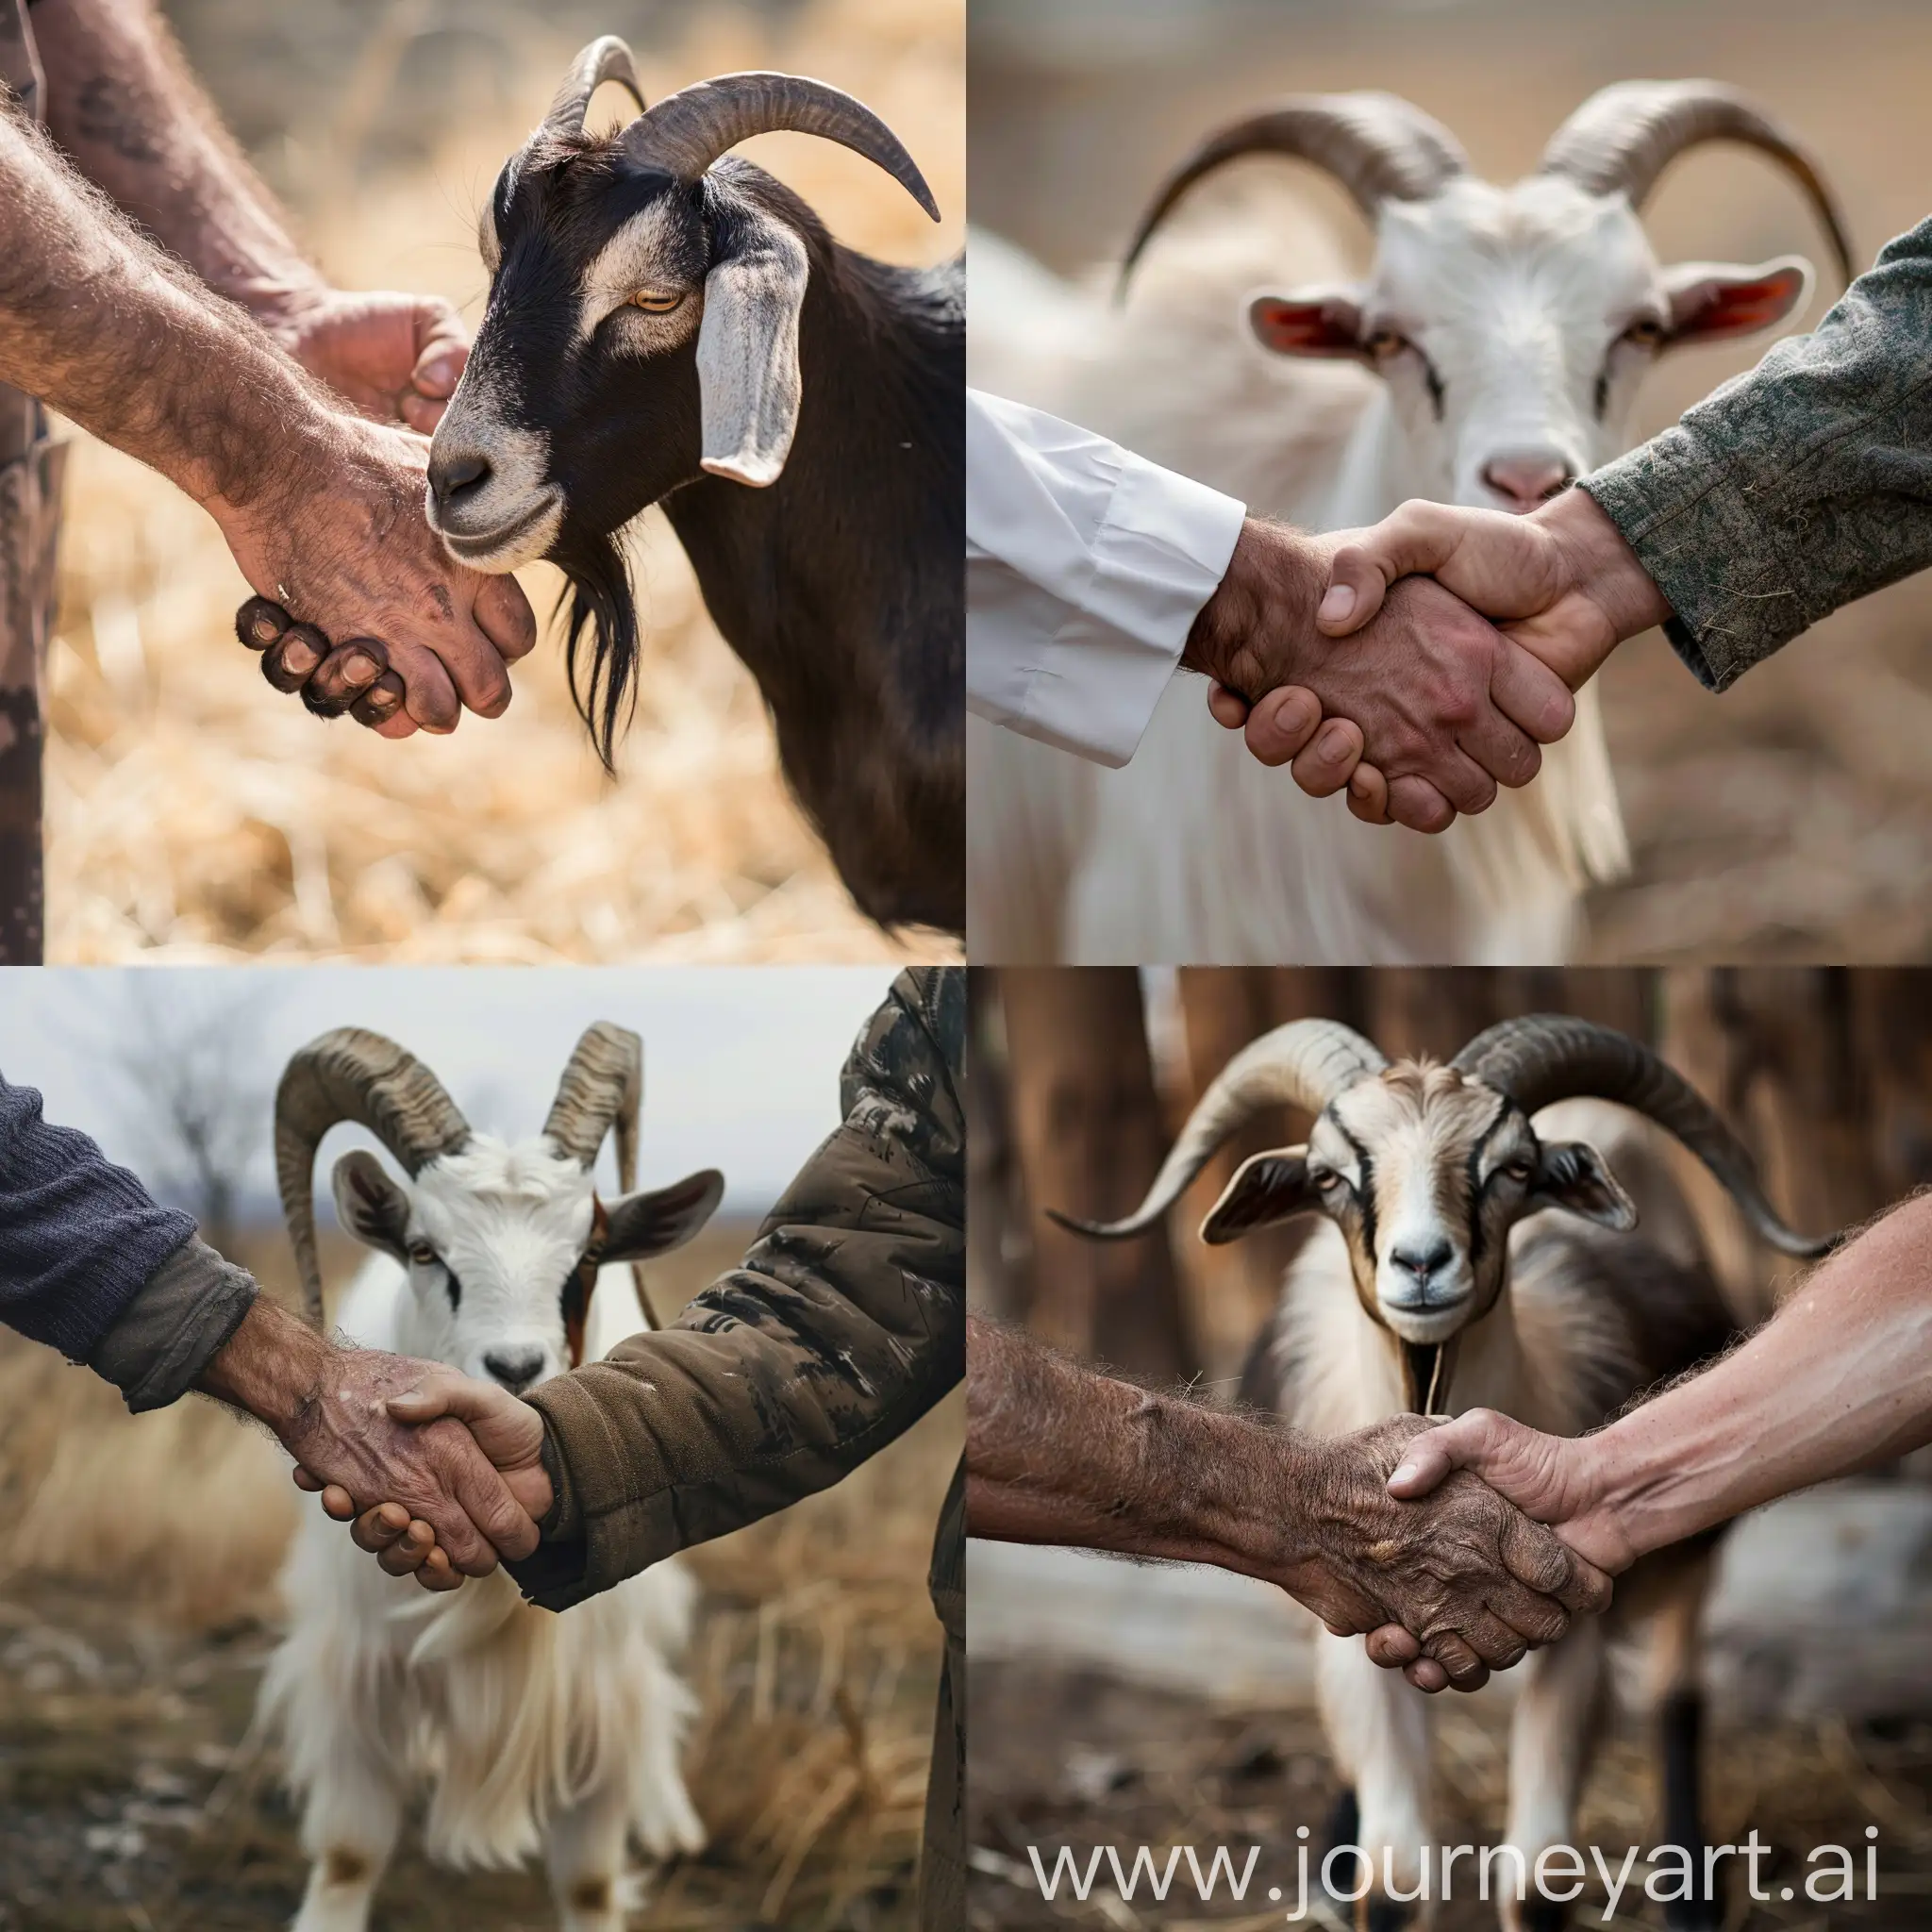 Mutual-Agreement-Butcher-and-Goat-Shaking-Hands